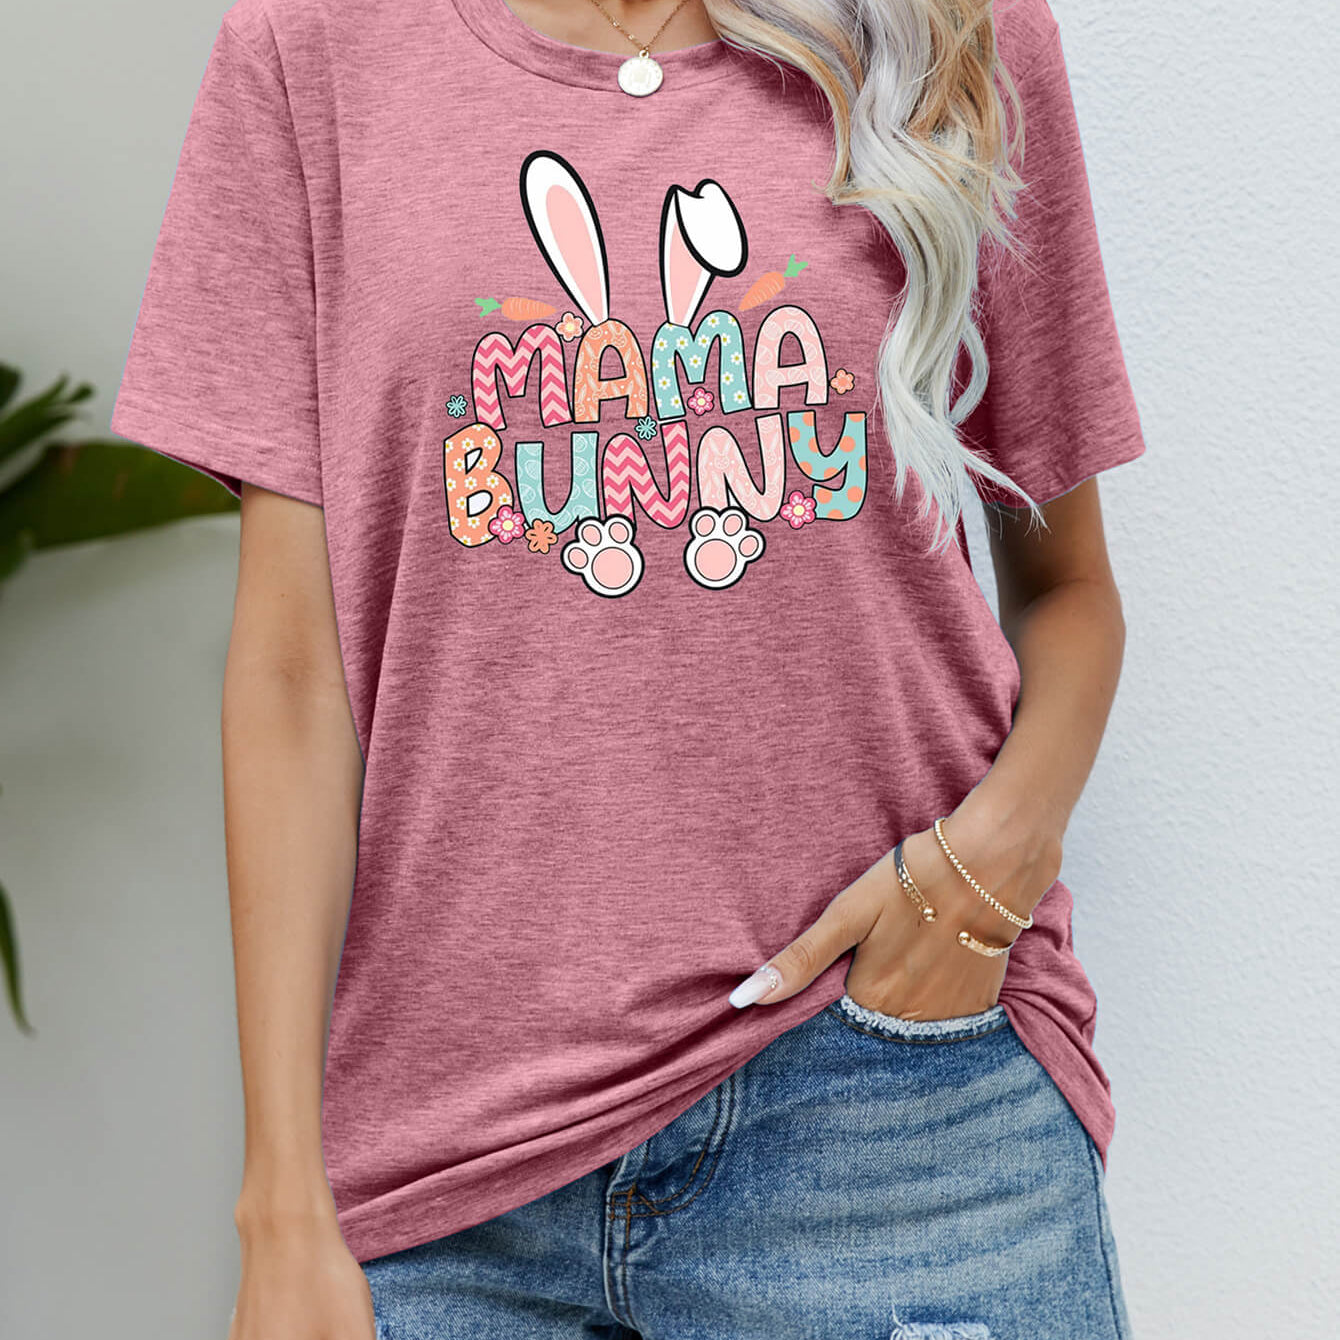 "MAMA BUNNY Easter Graphic Short Sleeve Tee - Embrace the Joy of Easter with this Whimsical Tee - Unleash Your Inner Romantic" - Guy Christopher